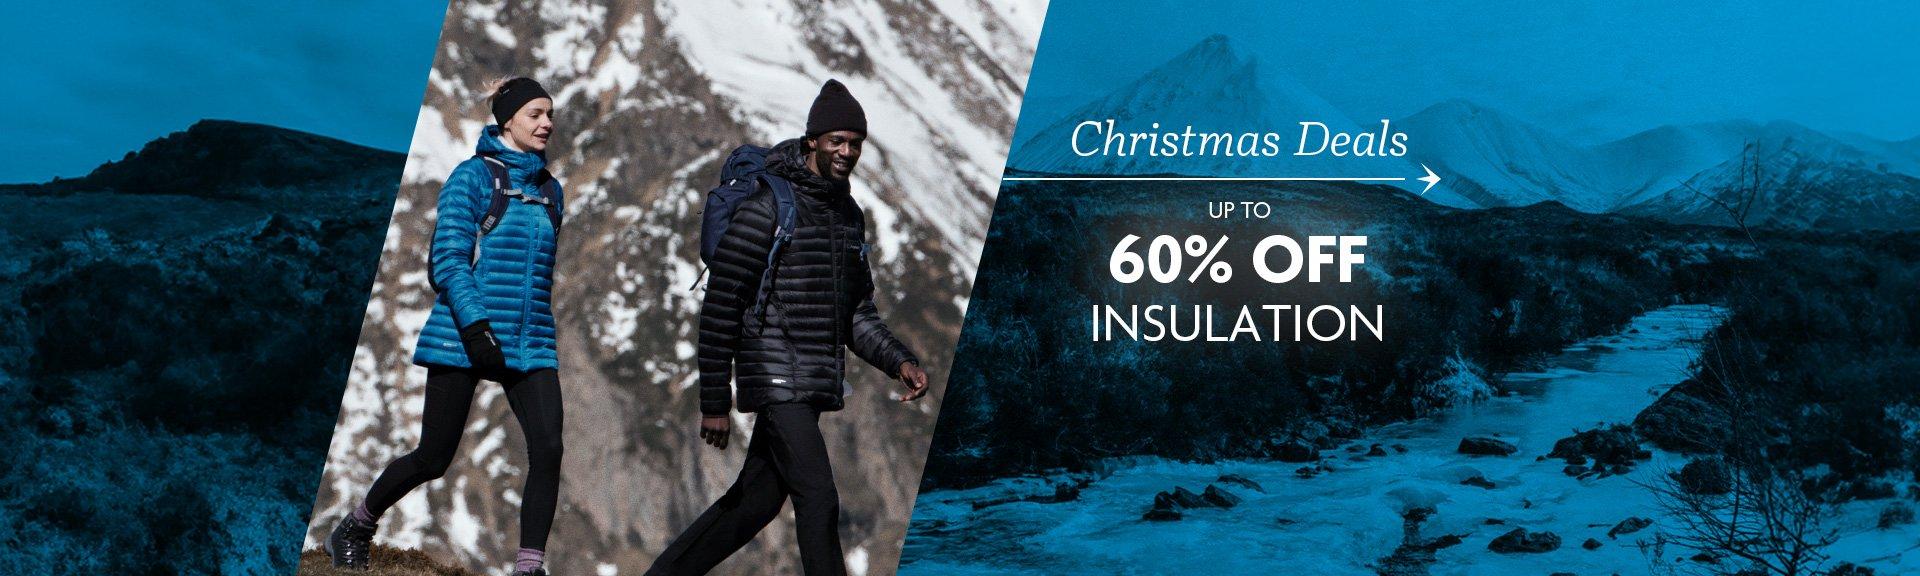 Christmas Deals - Insulation - Up To 60% OFF